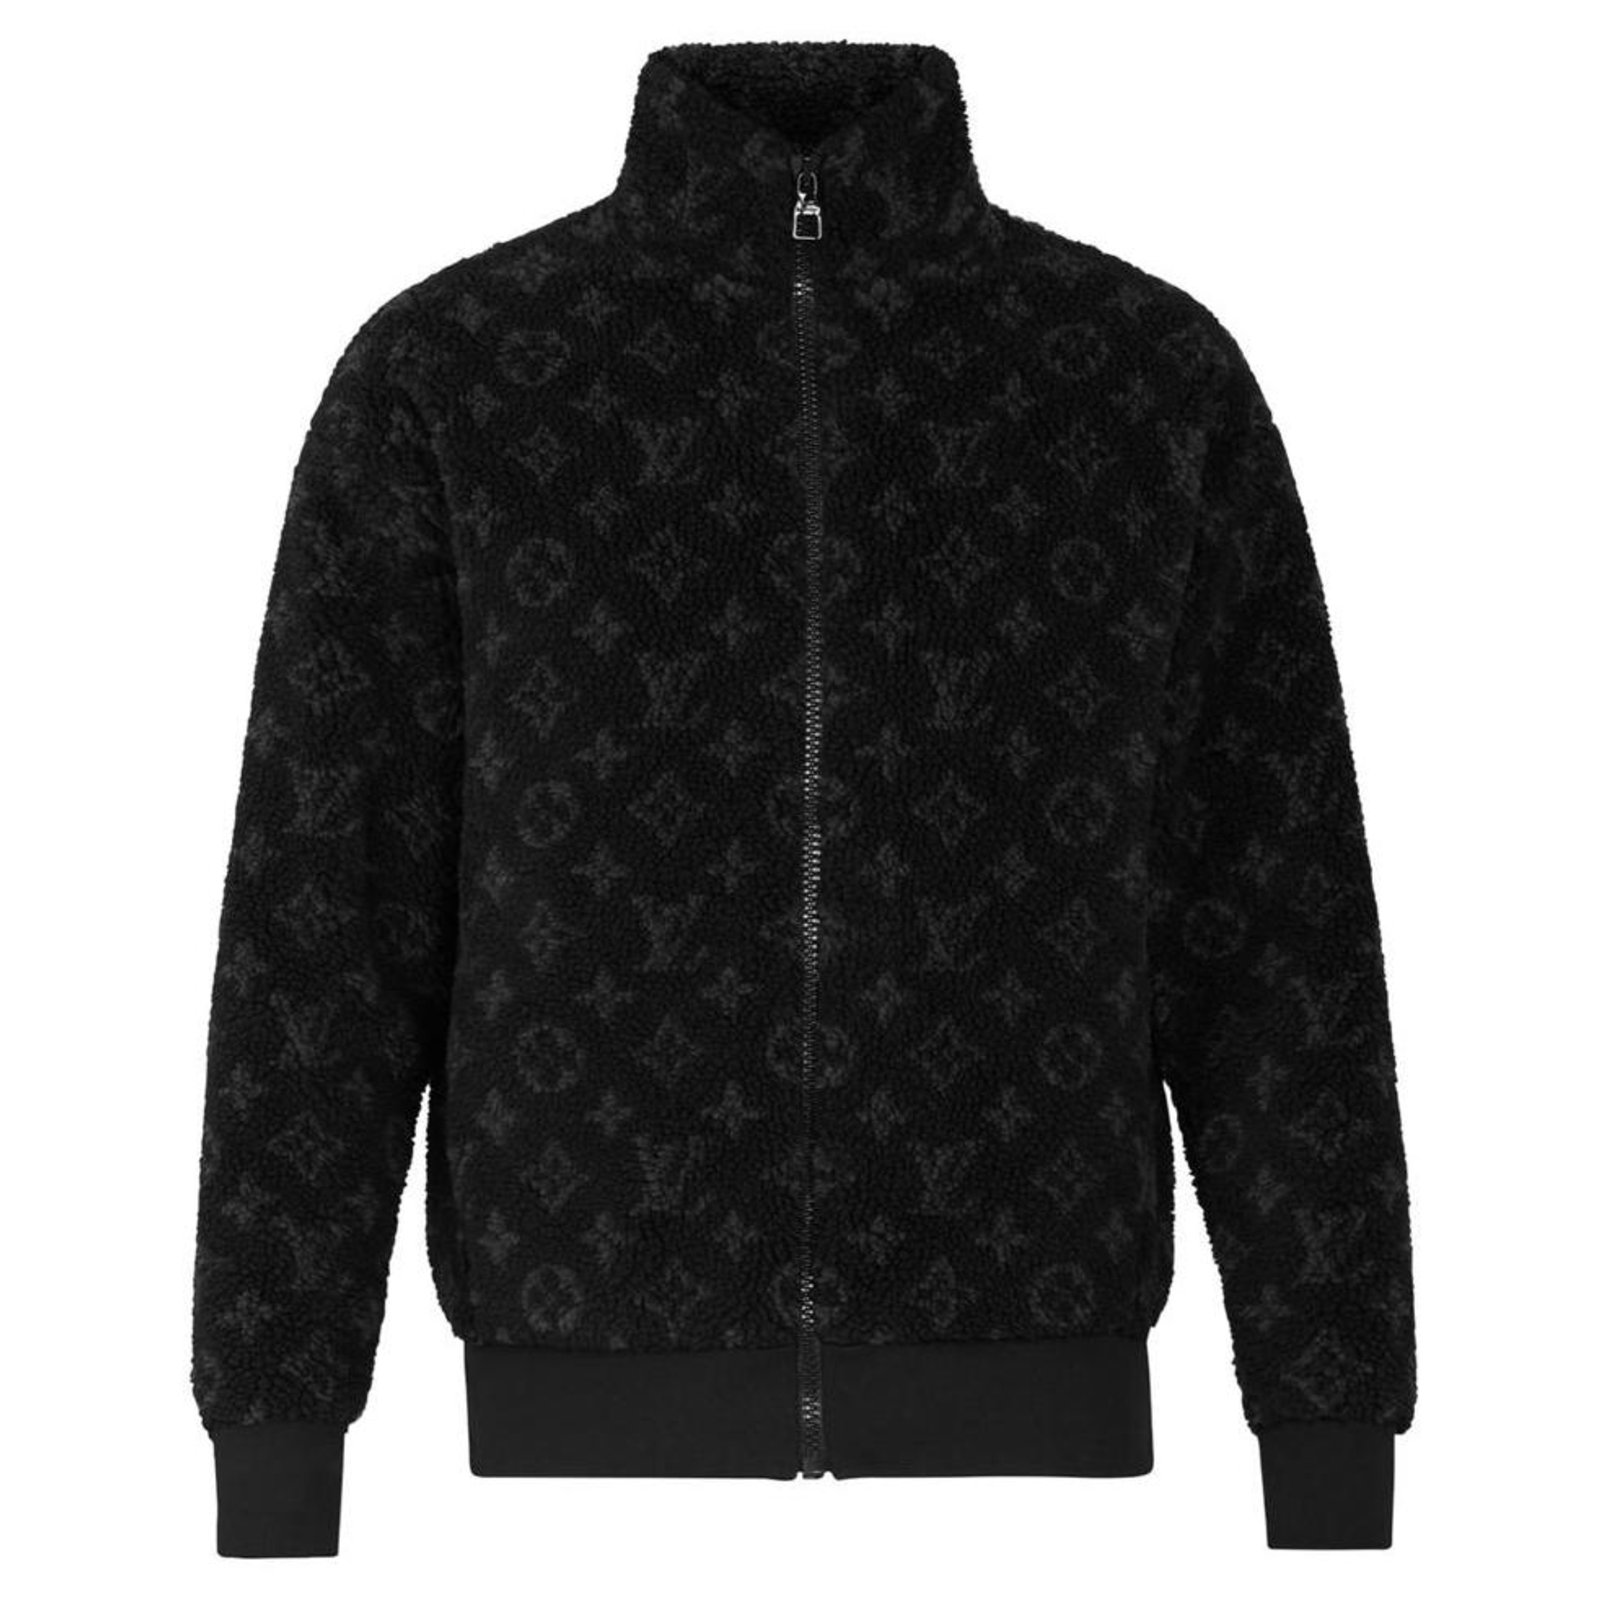 Buy Cheap Louis Vuitton Jackets for Men #999933499 from